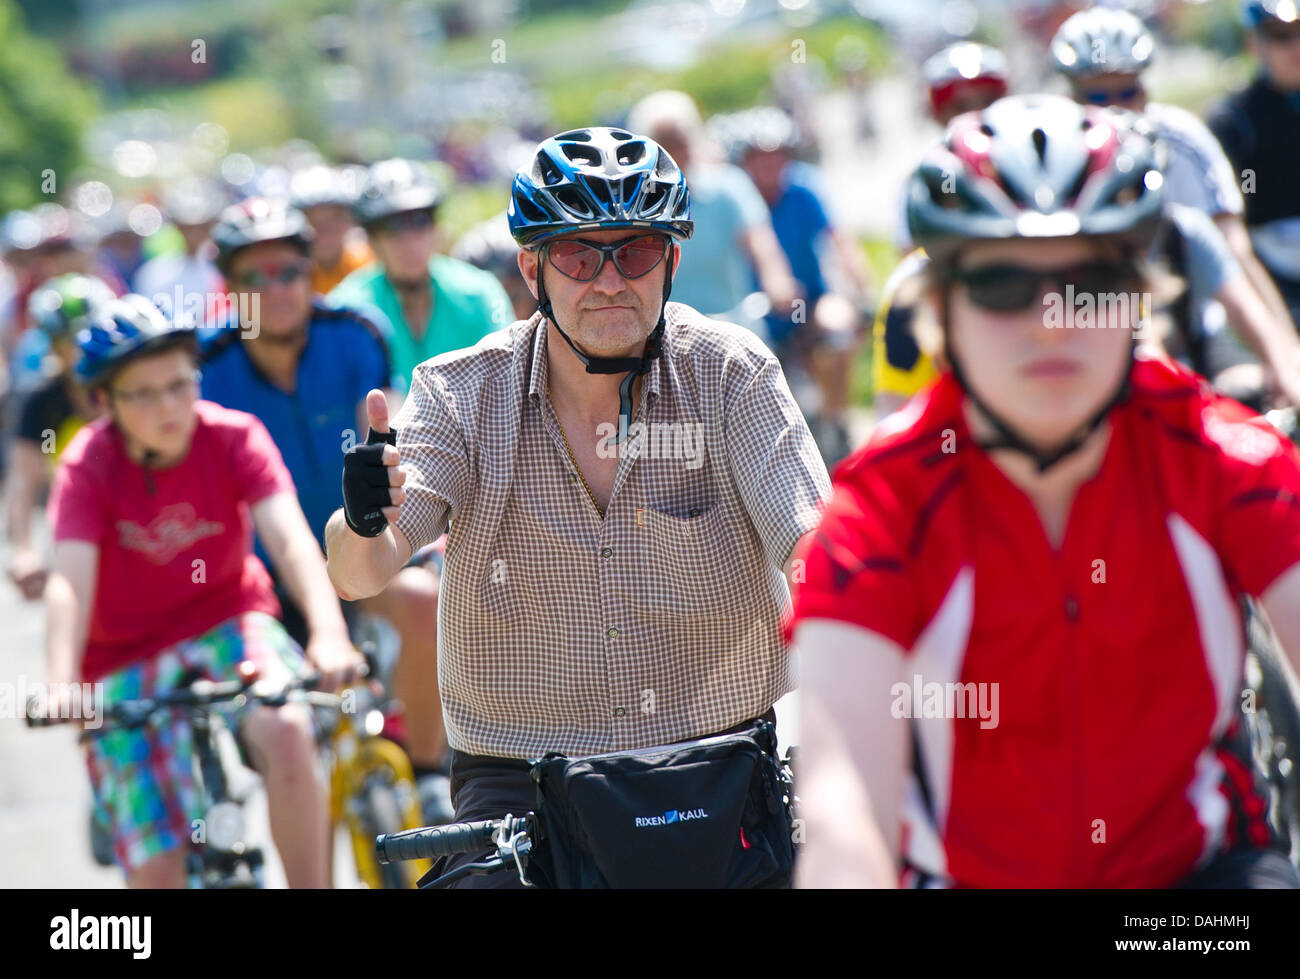 Participants cycle during the cycling rally (Fahrrad-Sternfahrt) through Stuttgart, Germany, 14 July 2013. Participants started in four different locations to cycle the between 13 and 28 kilometers to Stuttgart. Photo: DANIEL BOCKWOLDT Stock Photo